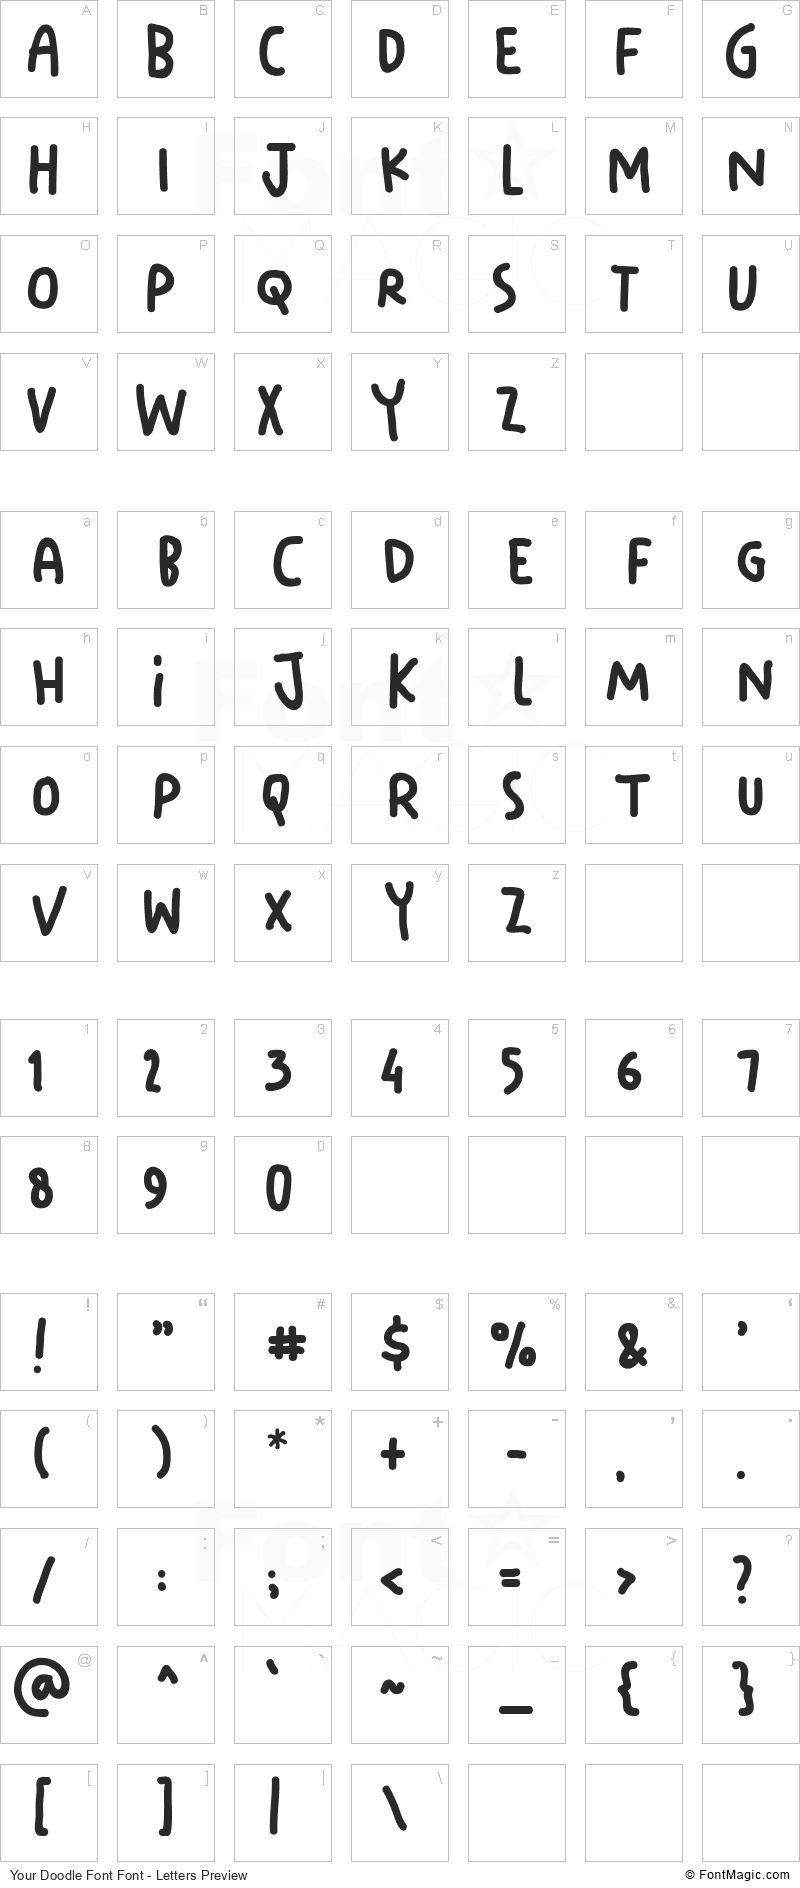 Your Doodle Font Font - All Latters Preview Chart